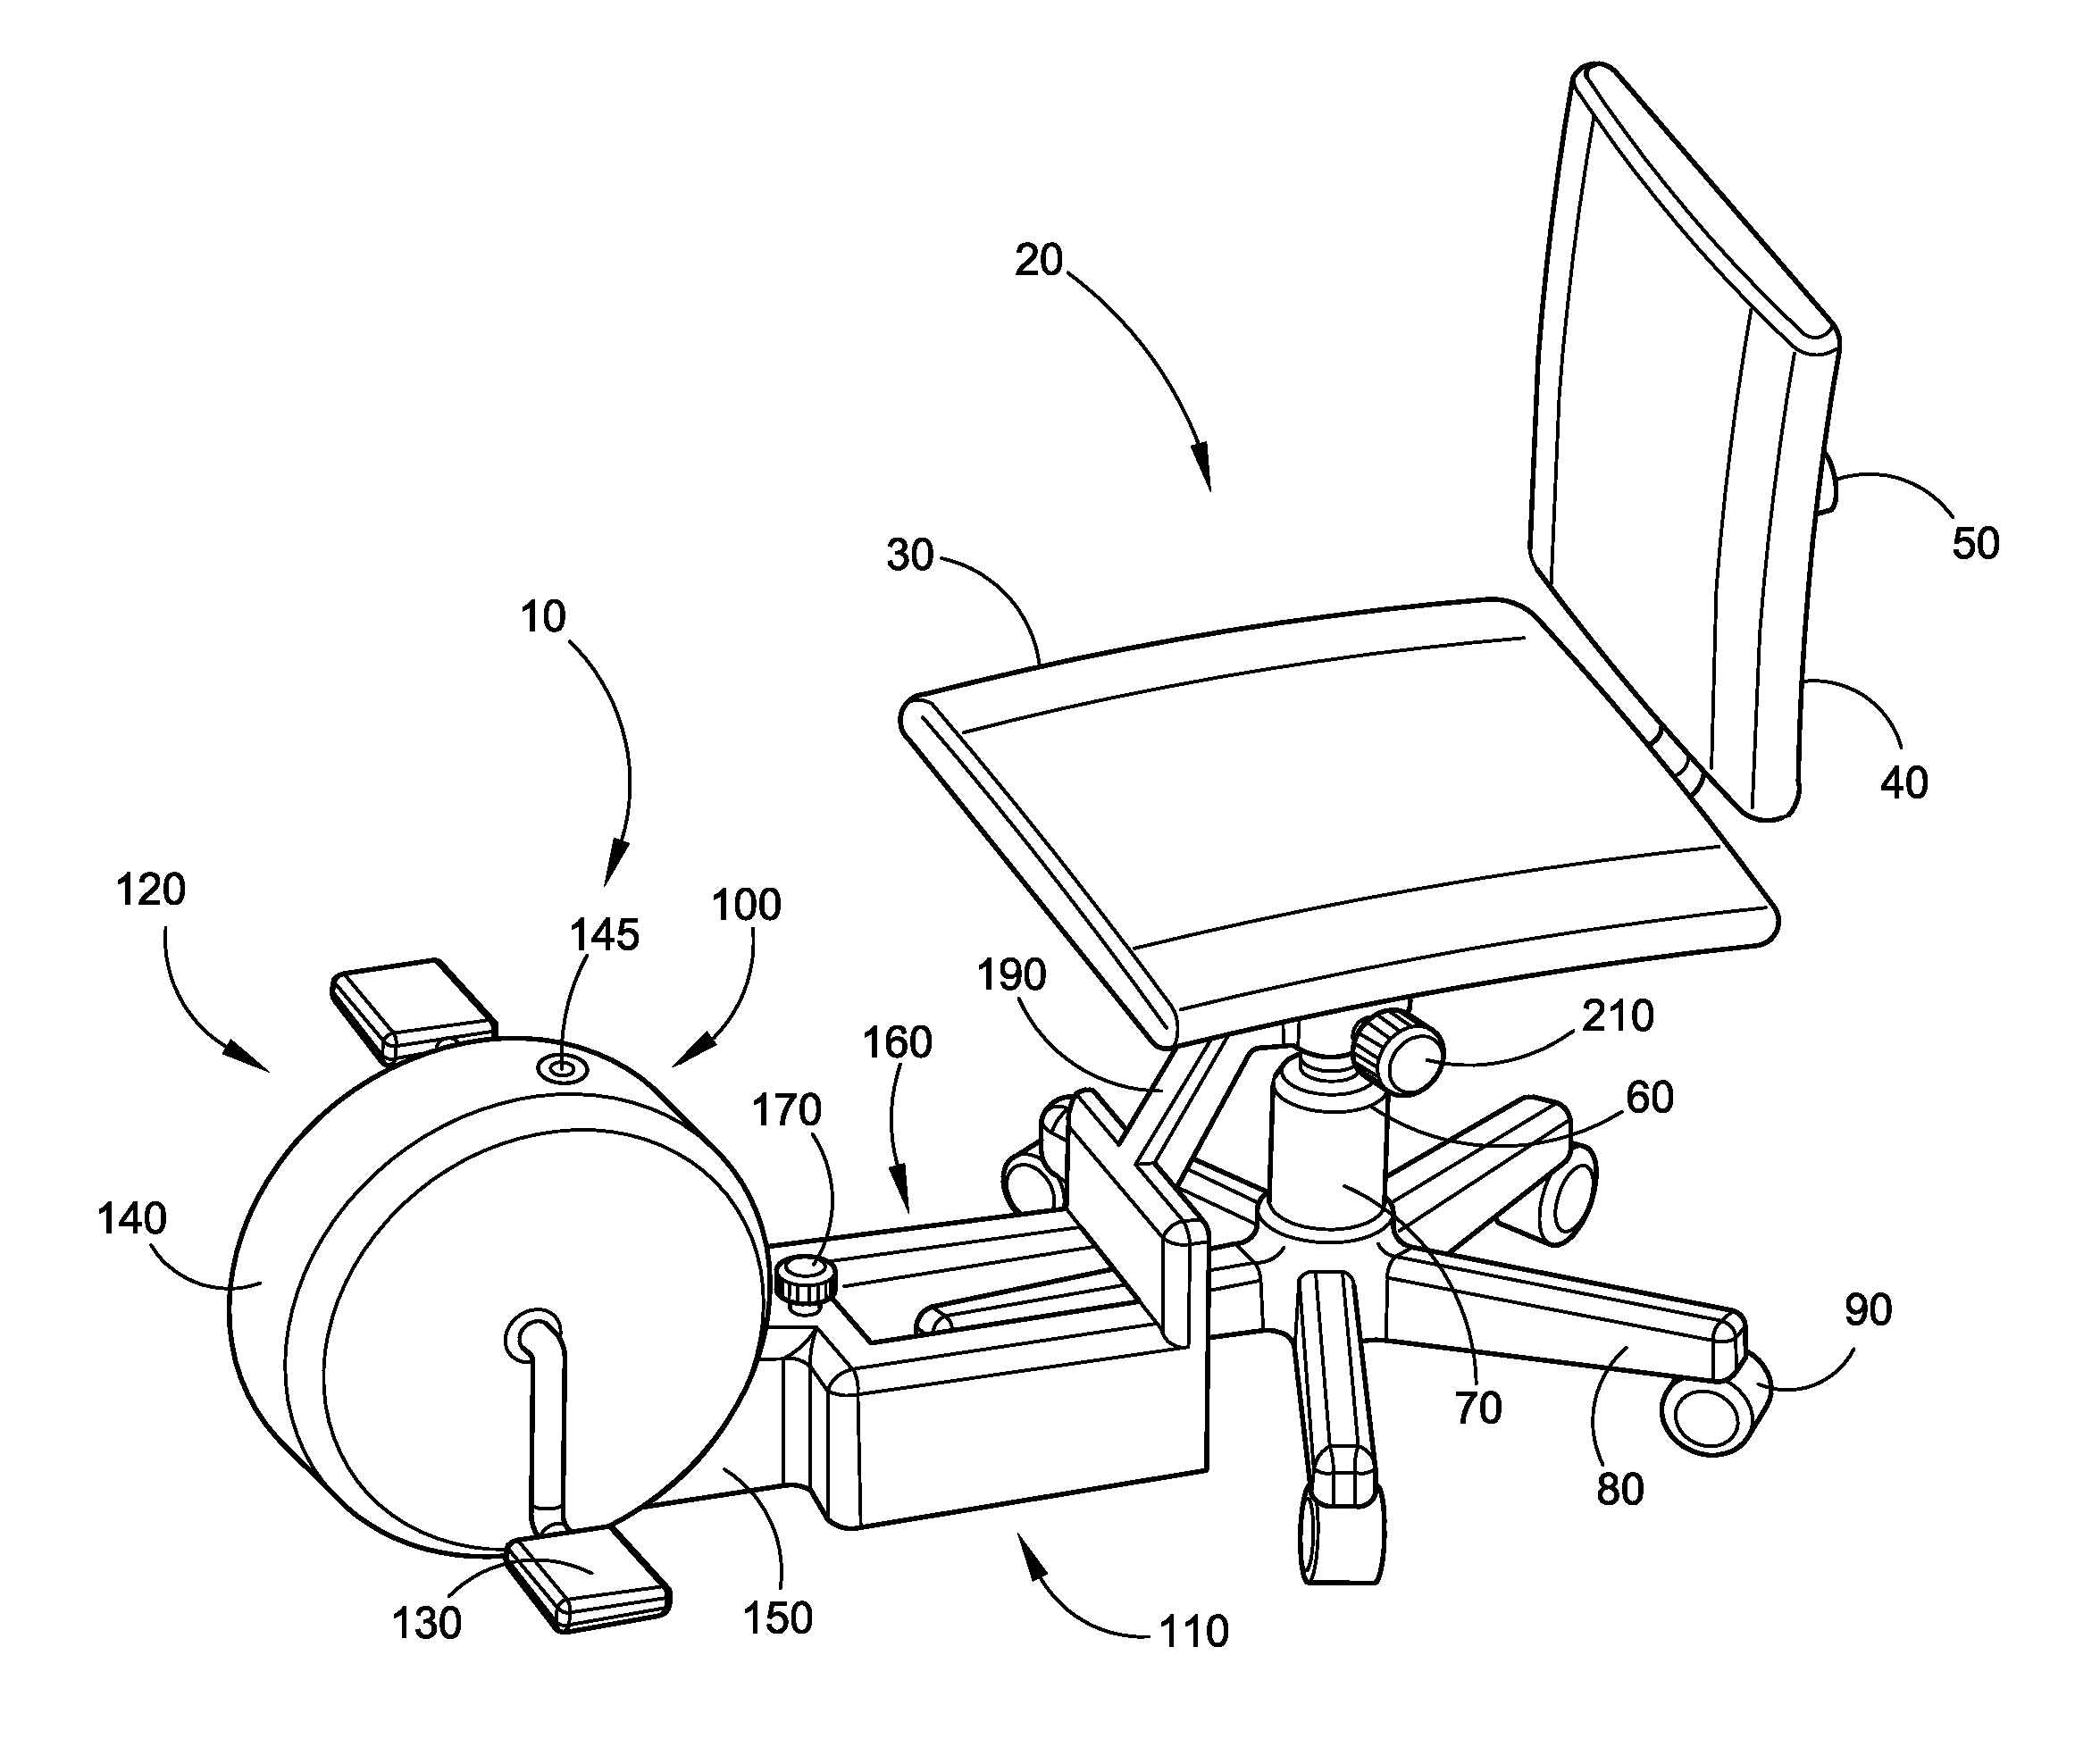 Leg exercise device for use with an office chair